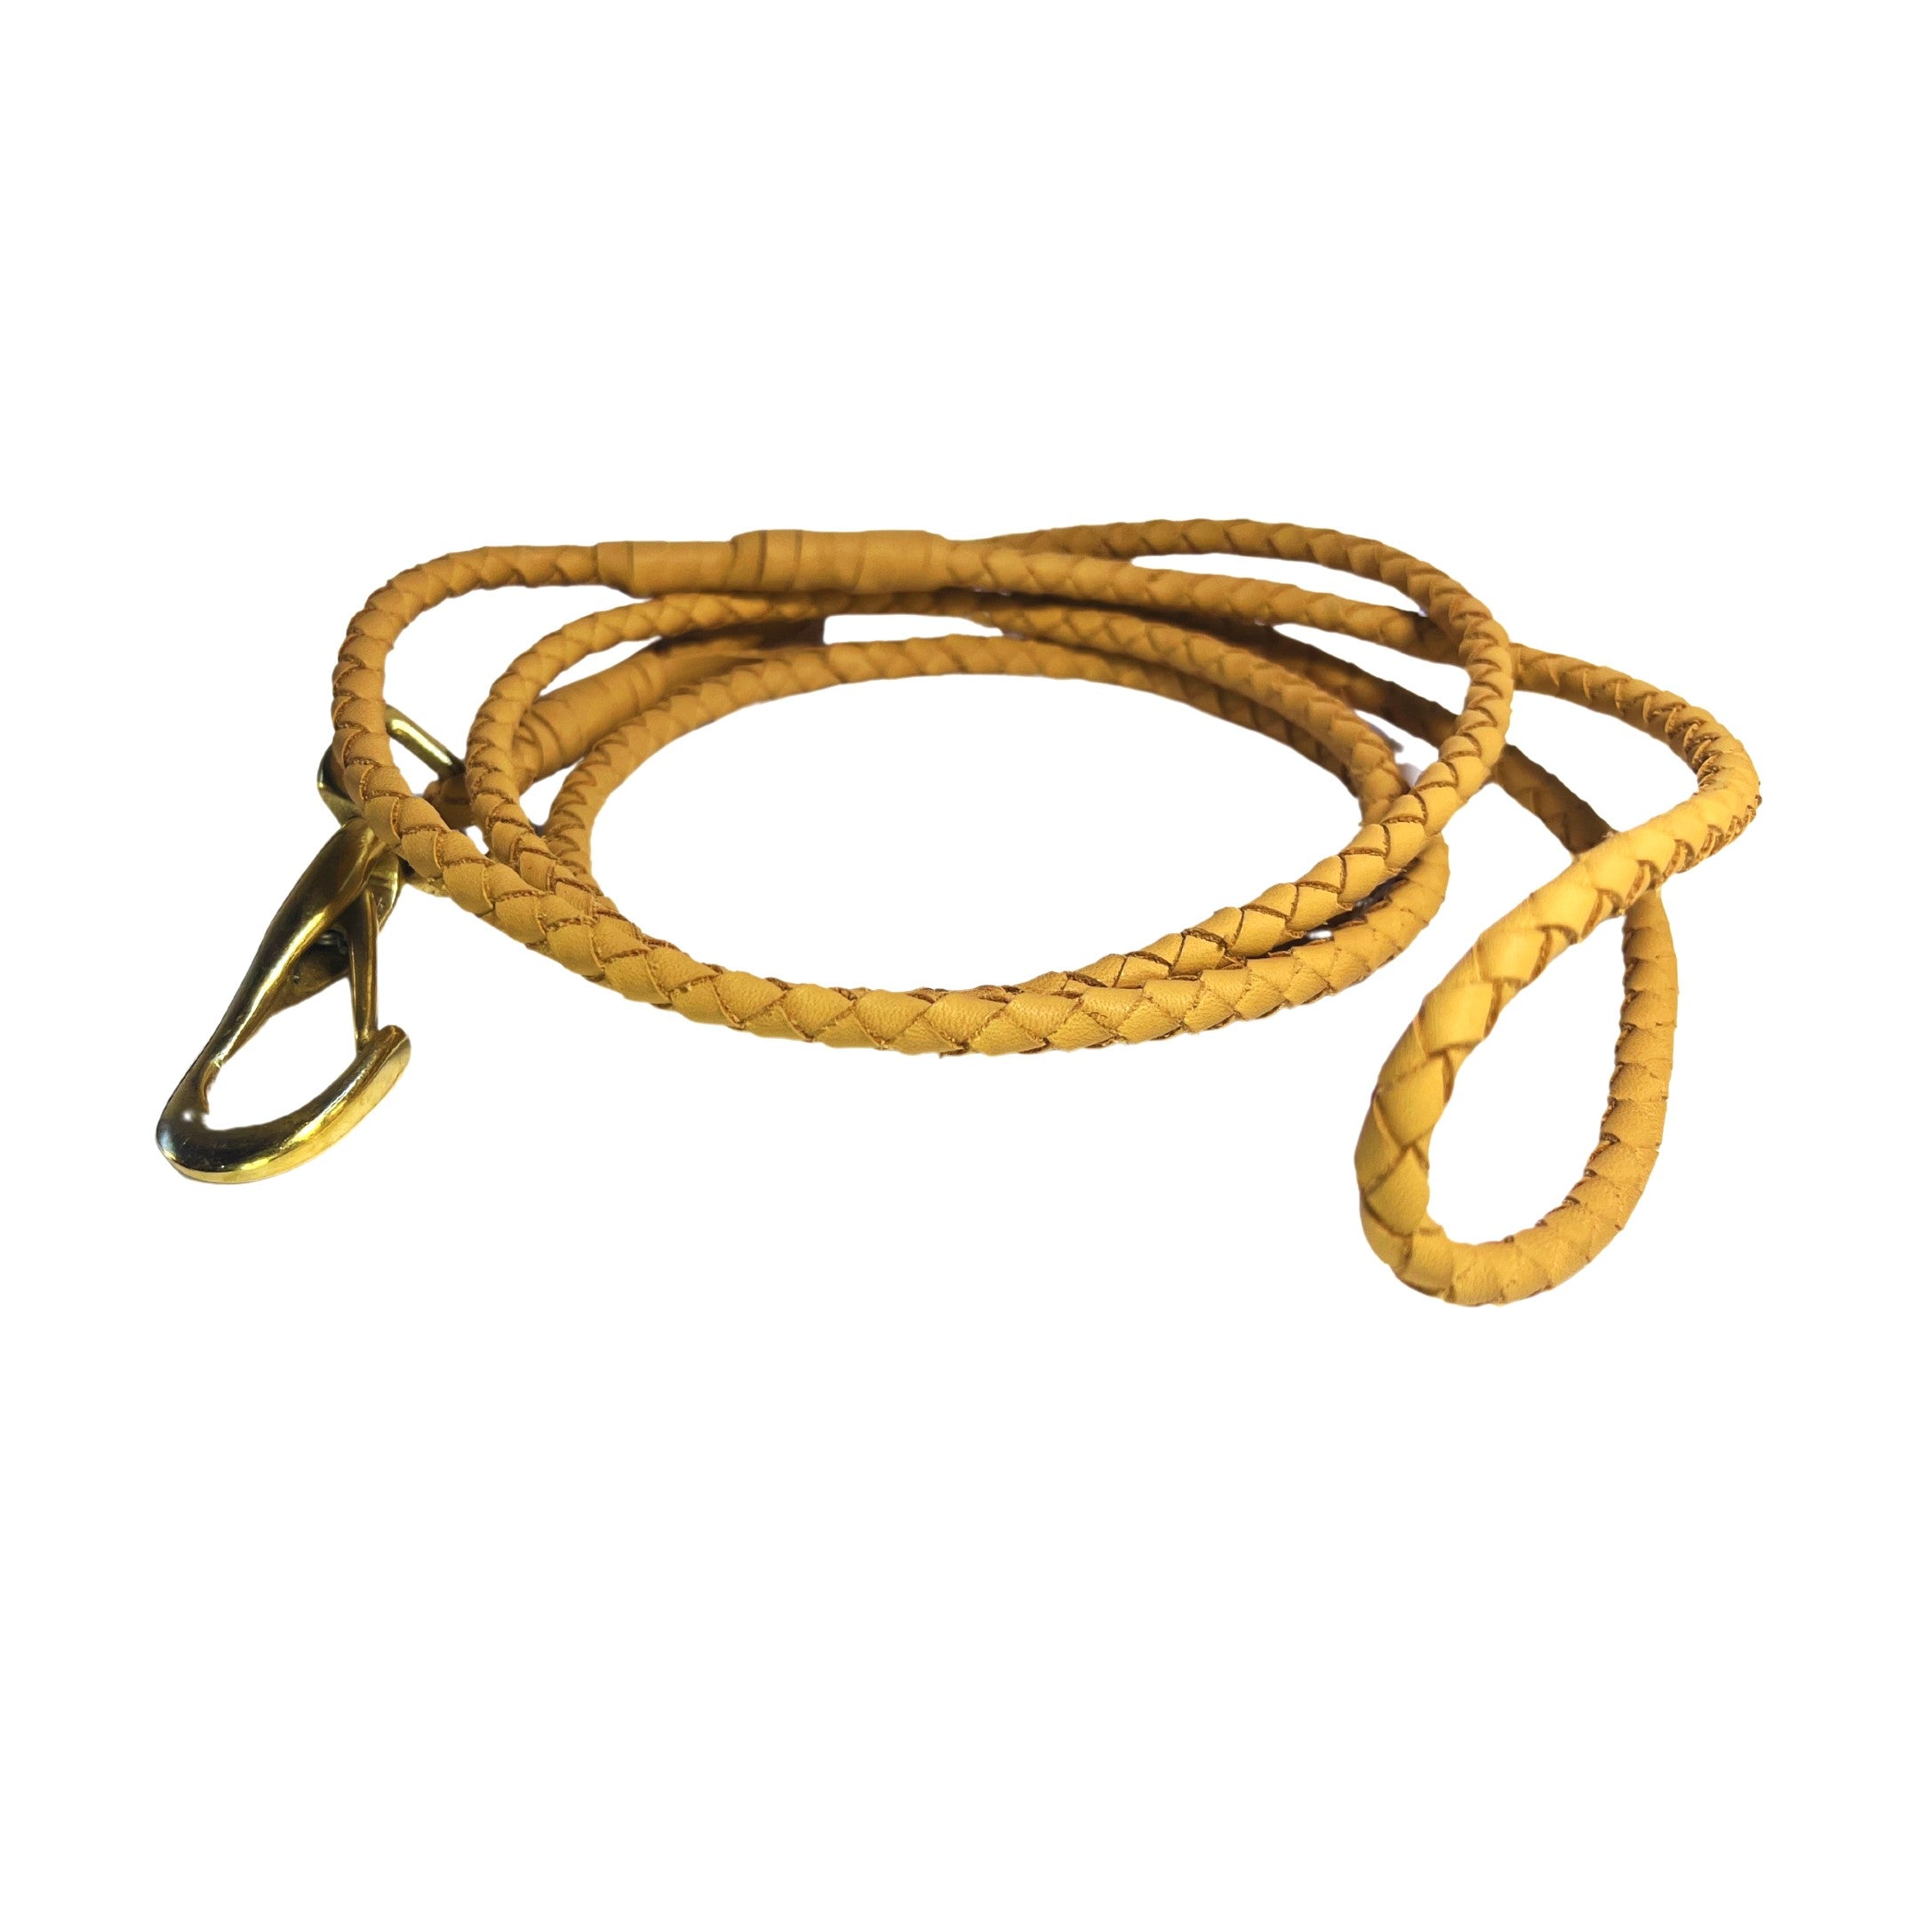 A coiled, braided golden-yellow Georgie Paws Lulu Lead - raw with a glossy brass carabiner clasp, isolated on a white background, possibly for small pet restraint.